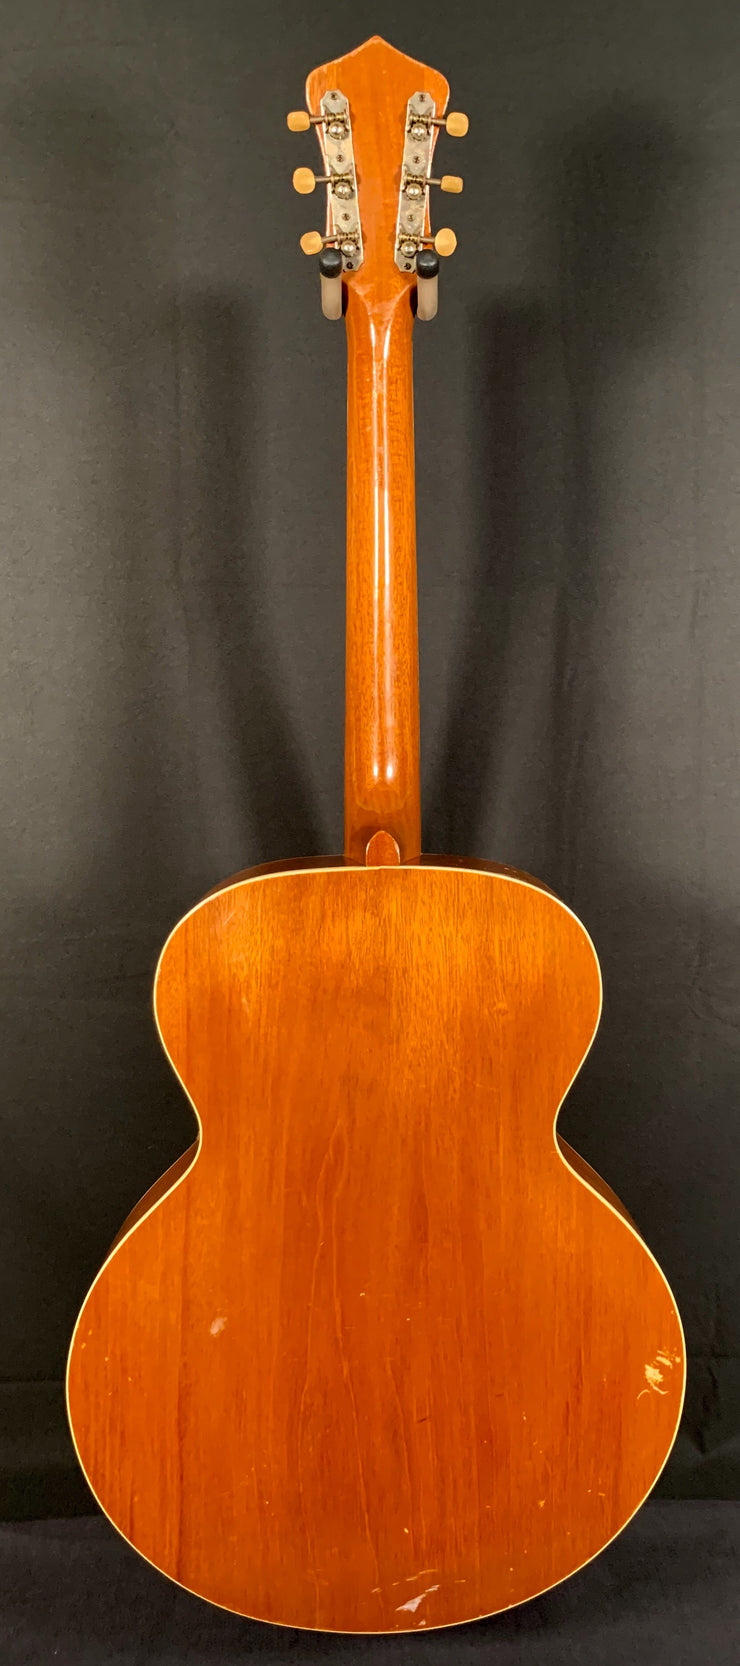 **** SOLD **** Washburn Made by Gibson model 5243 “Aristocrat”